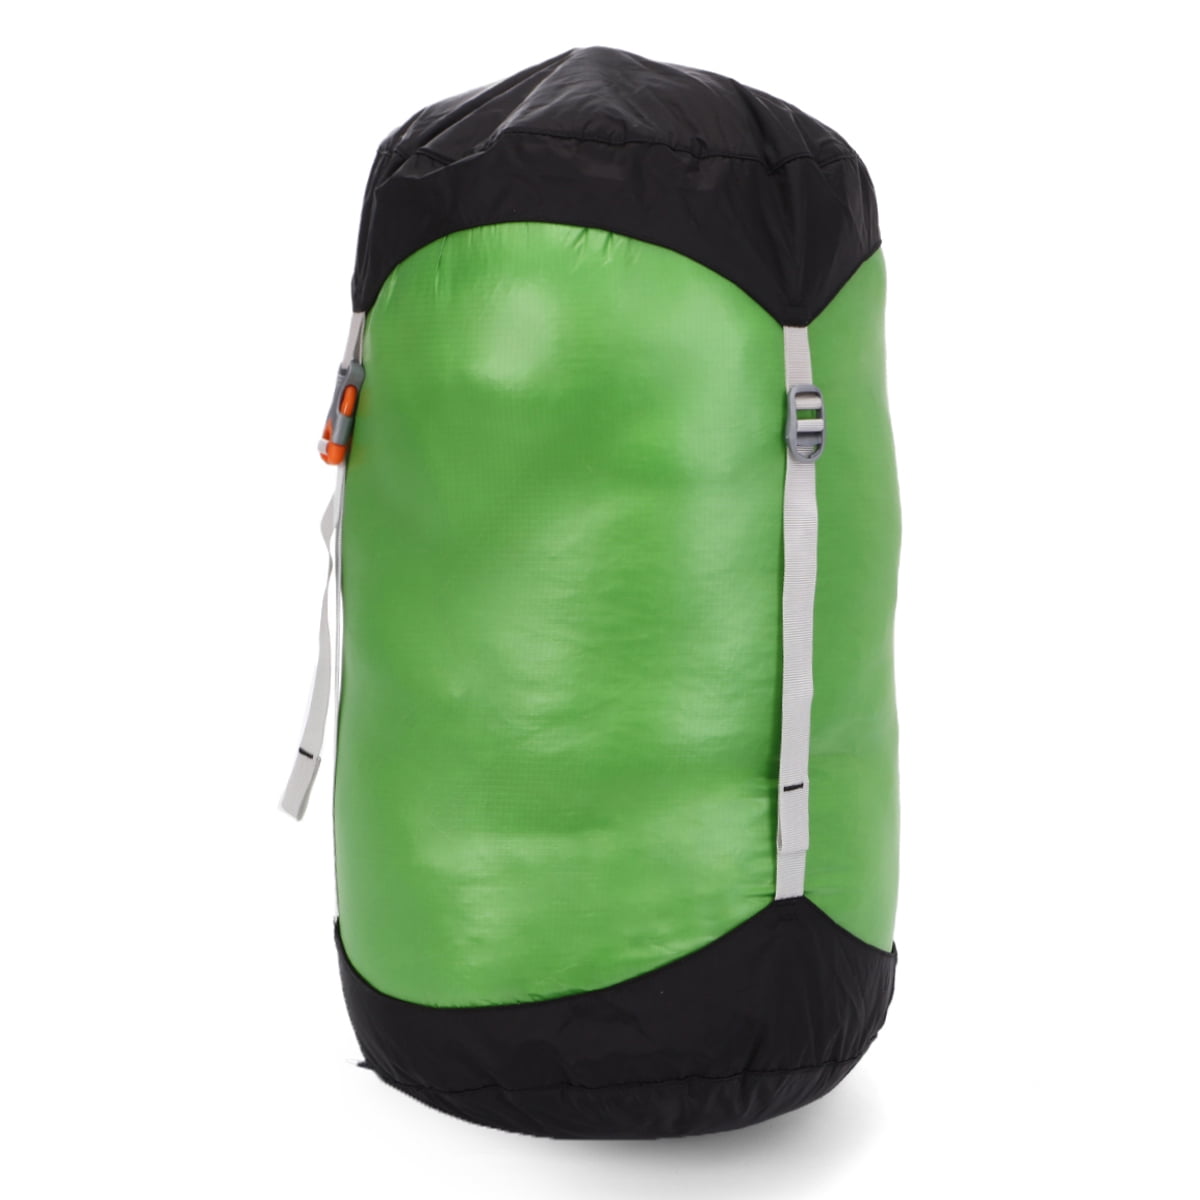 Details about   New Winter Heater Thermal Equipment For Skiing Traveling Camping Hiking Picnic 